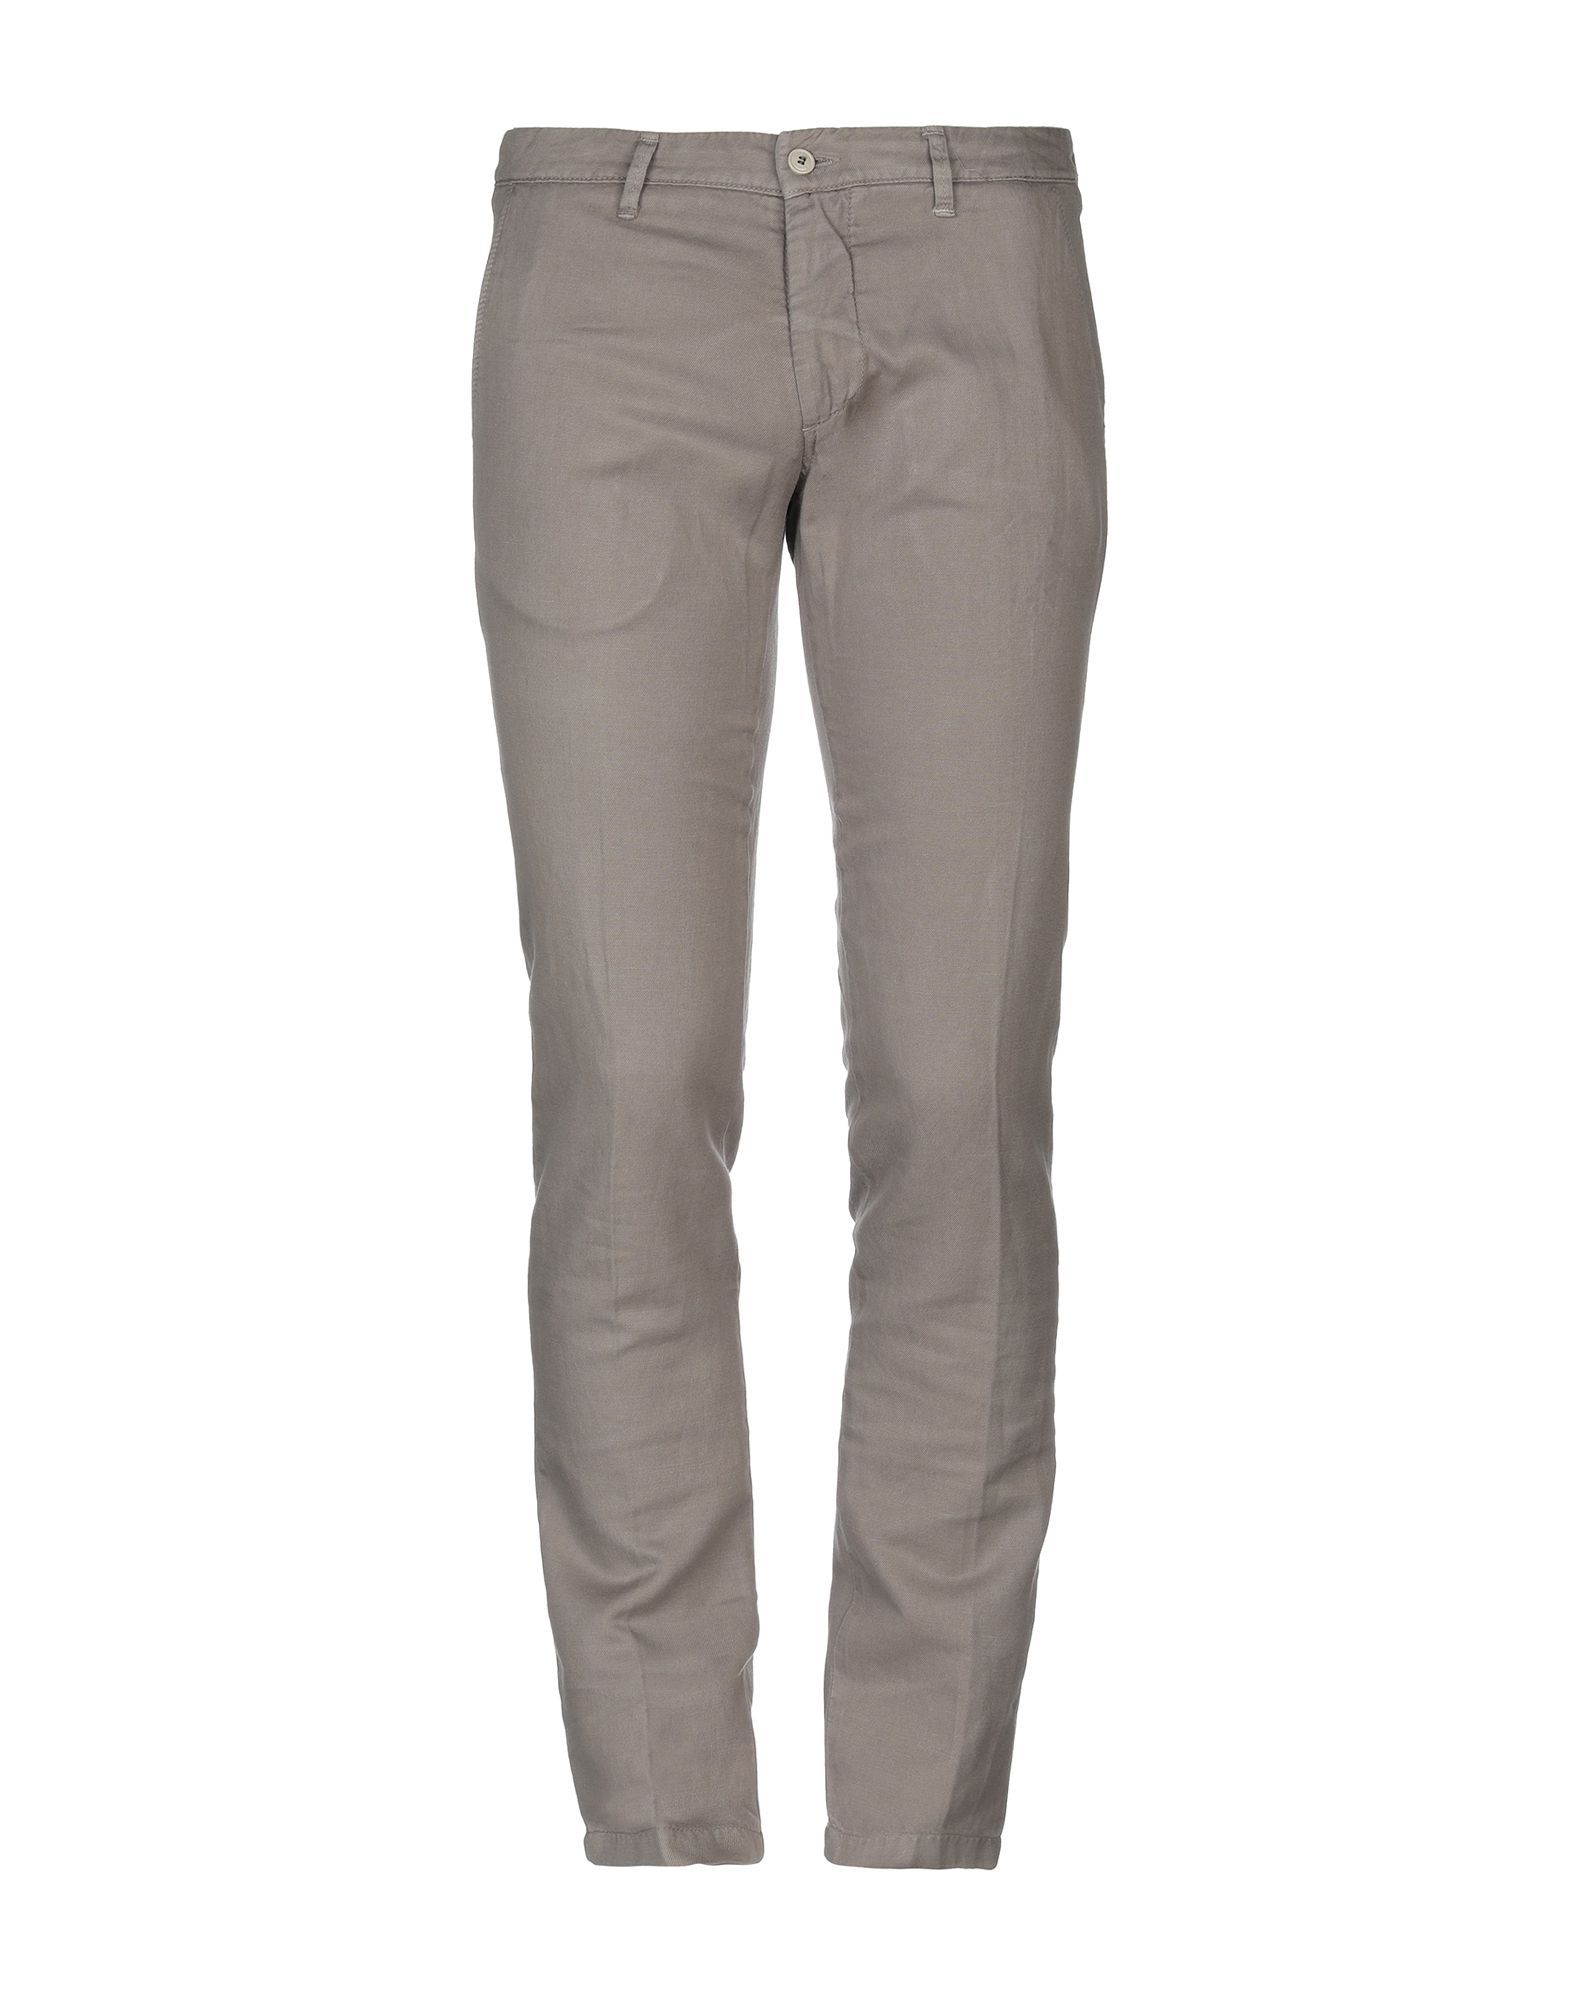 plain weave, logo, solid colour, low waisted, regular fit, tapered leg, button, zip, multipockets, chinos, small sized